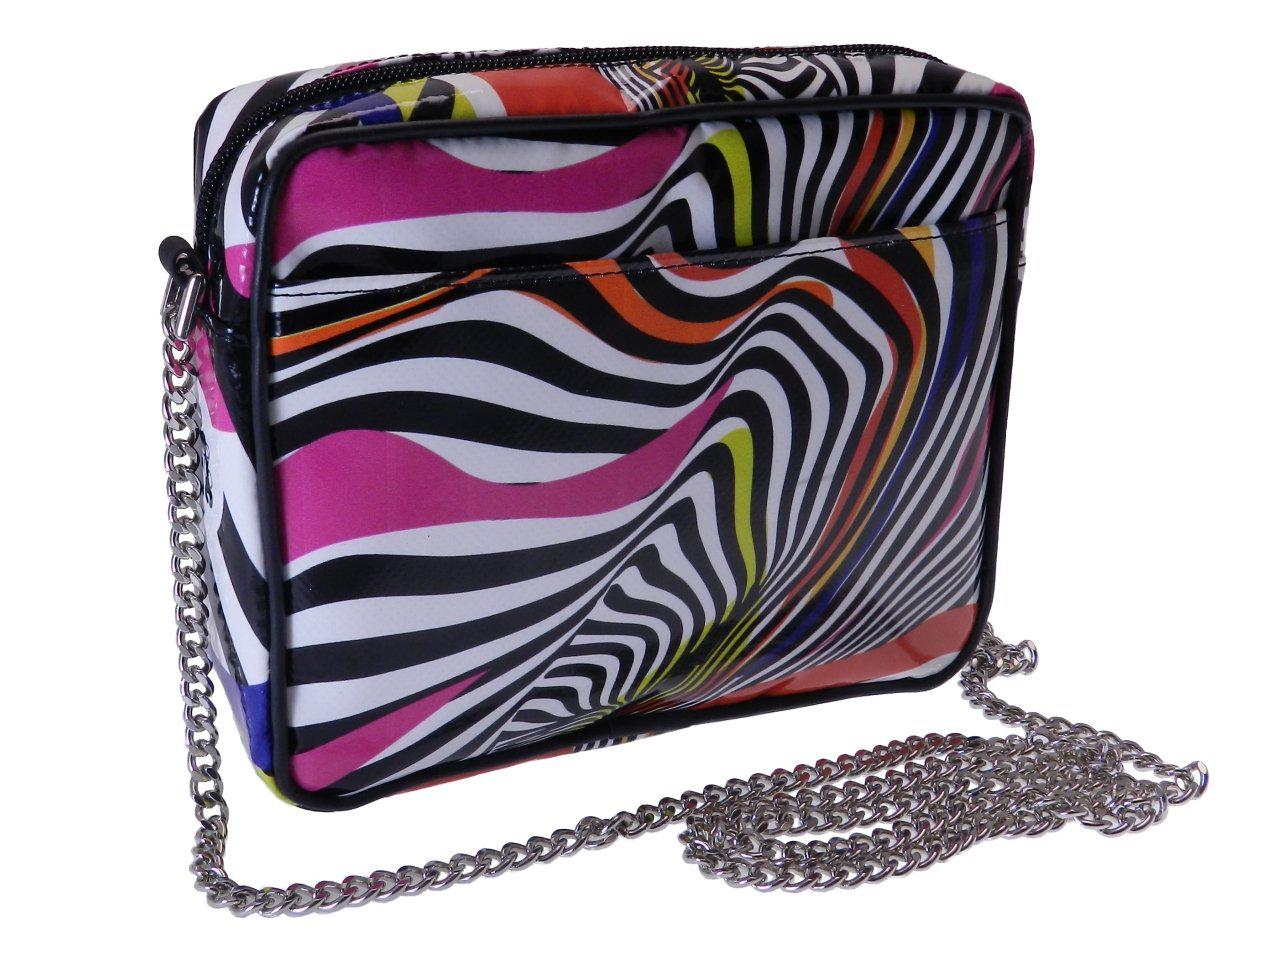 MULTICOLOR CLUTCH ANIMAL PATTERN. PARK MODEL MADE OF LORRY TARPAULIN. - Limited Edition Paul Meccanico